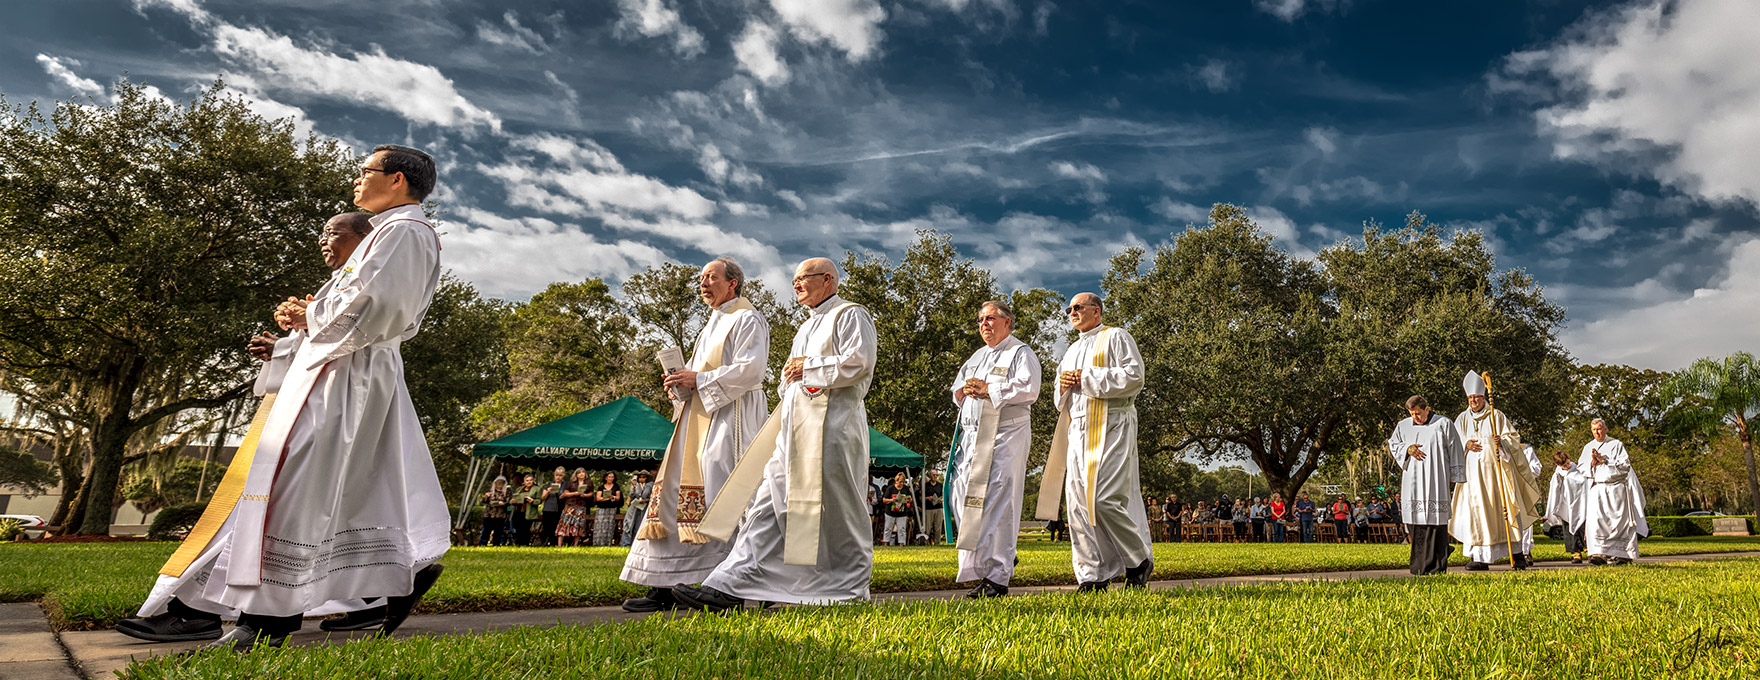 Most Reverend Gregory L. Parkes, left center, and priests and deacons of the Diocese of St. Petersburg process to the outdoor altar at Calvary Catholic Cemetery for Mass on All Souls' Day', November 2, 2020.